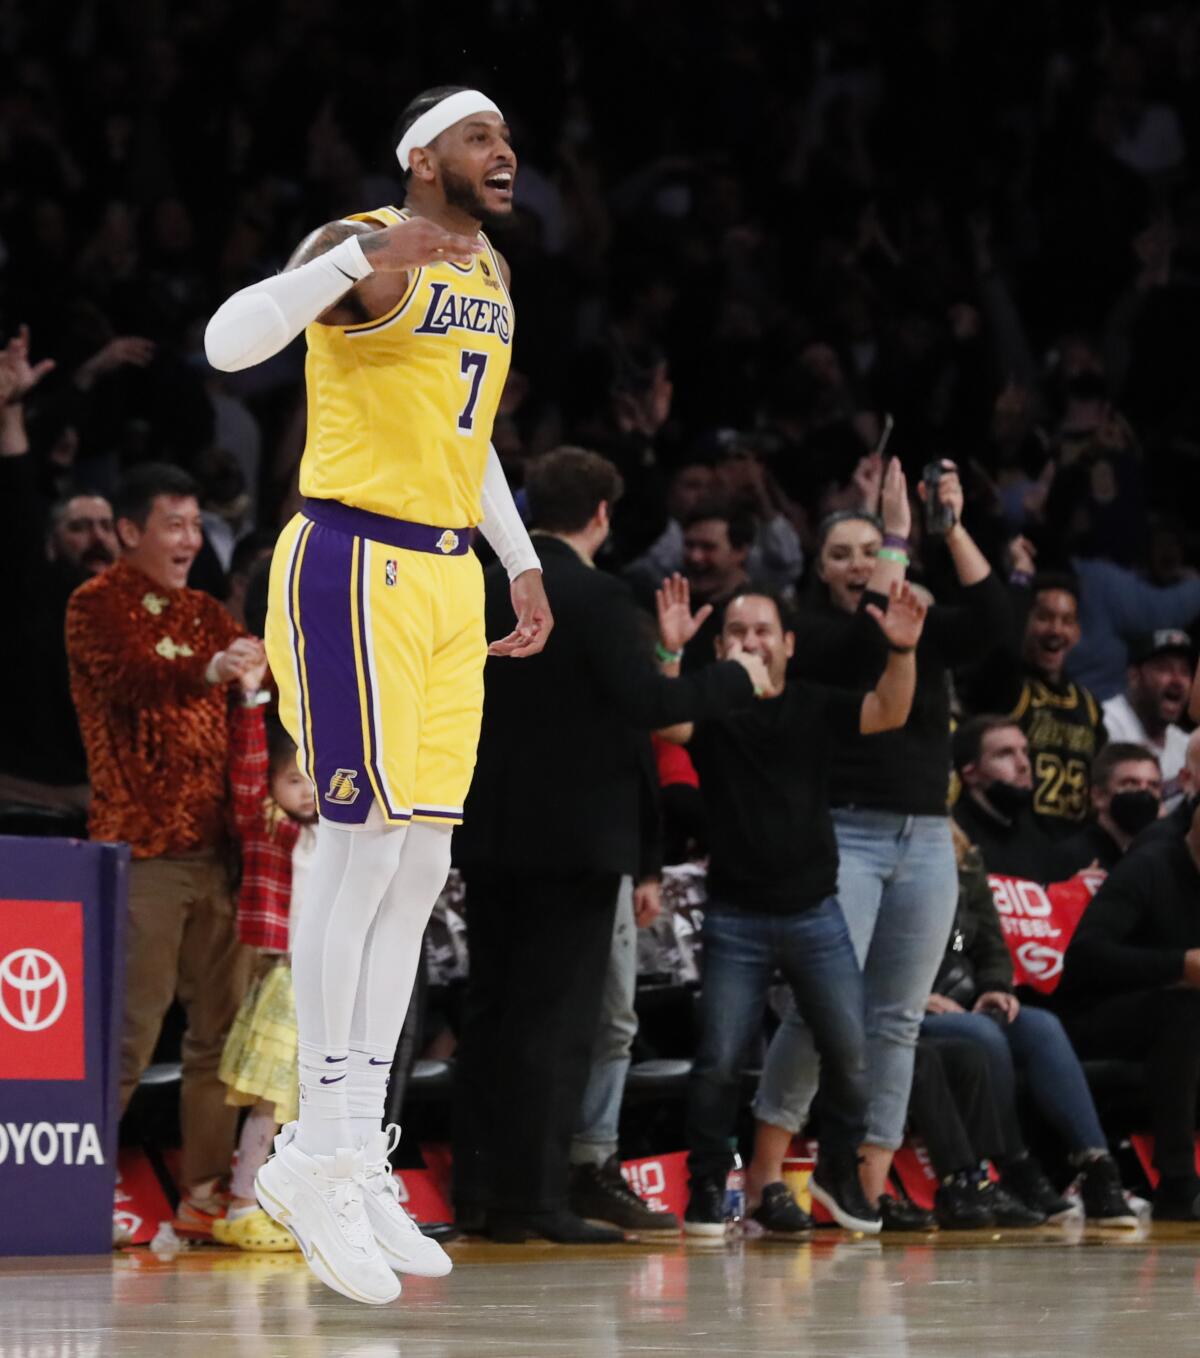 The Lakers' Carmelo Anthony smiles and jumps during a game.